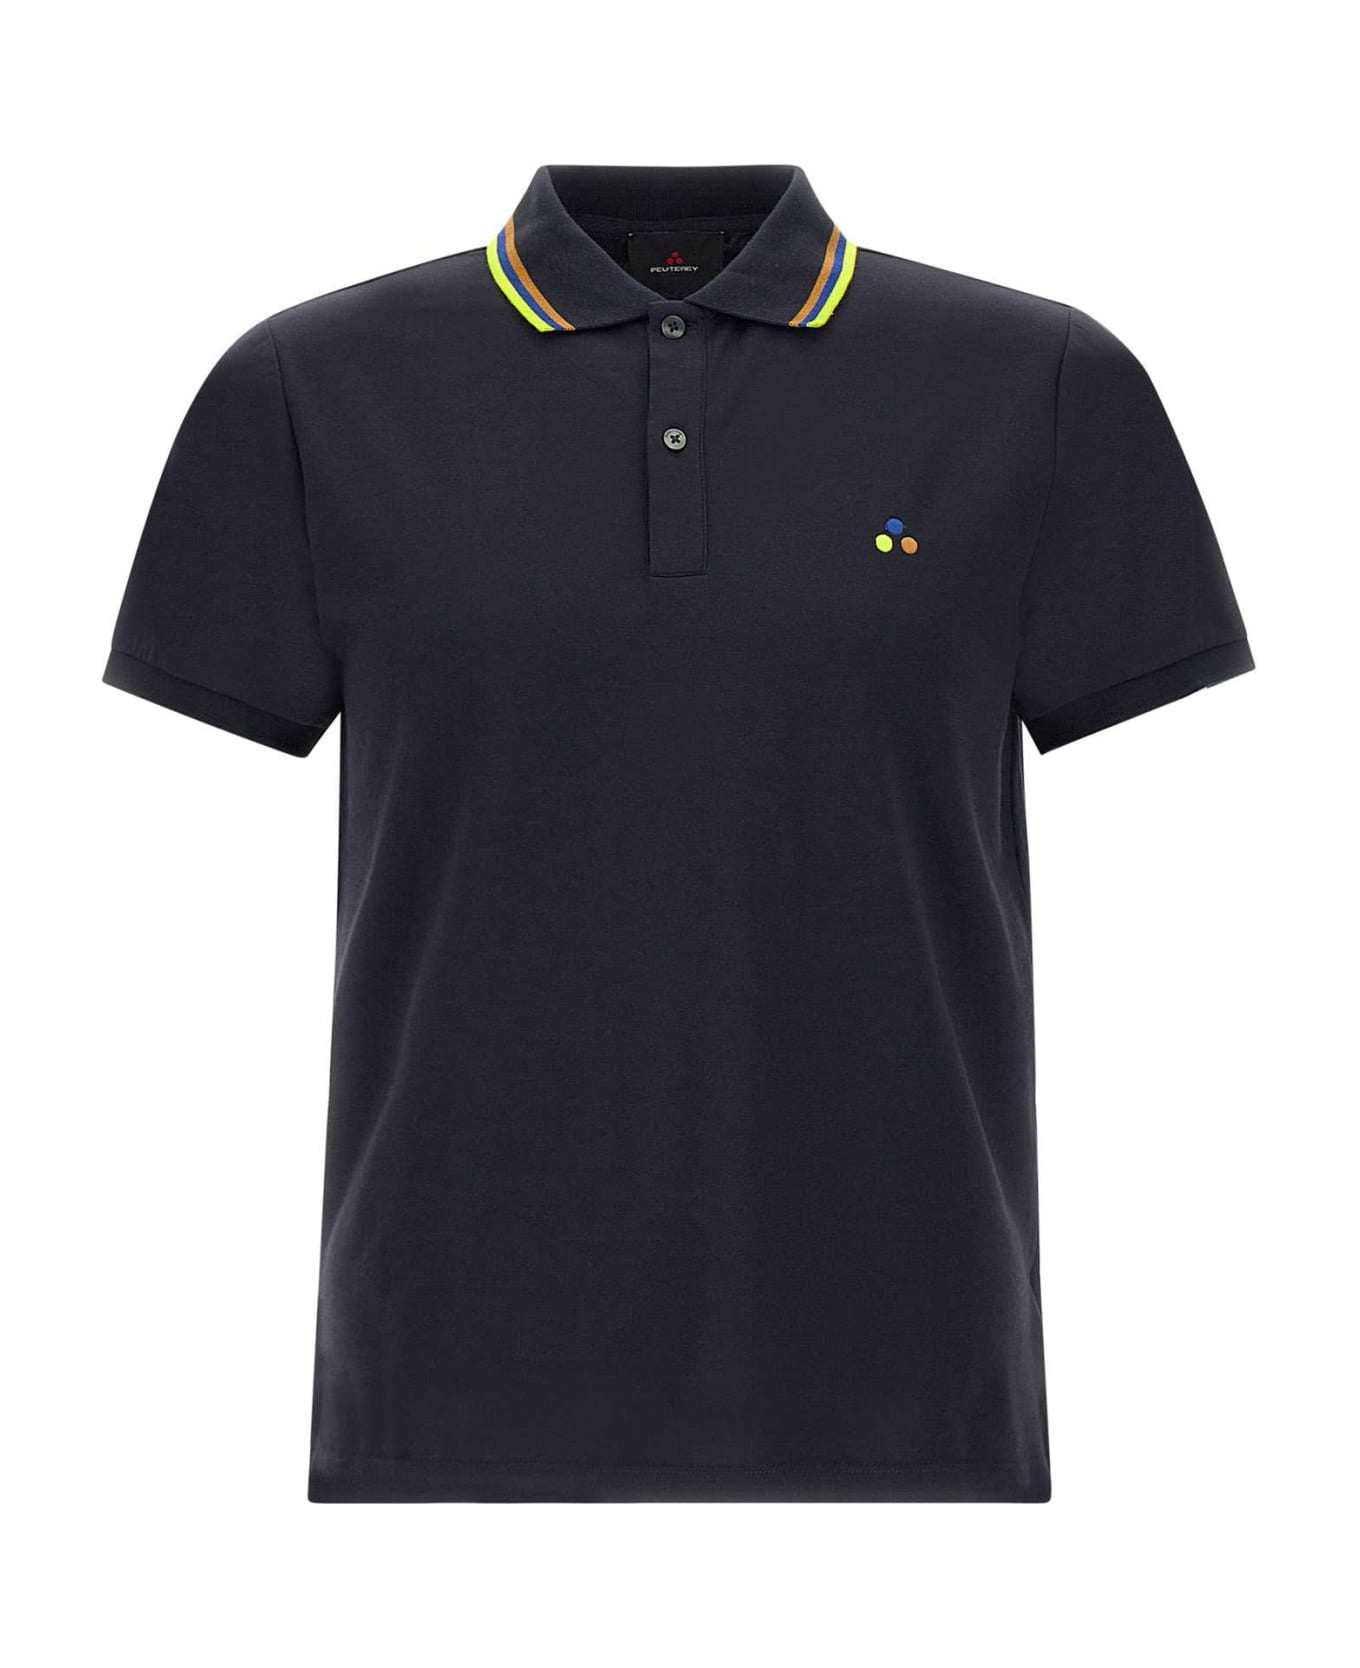 Peuterey 'prizzi' Cotton And Silk Blend Polo Shirt | italist, ALWAYS ...